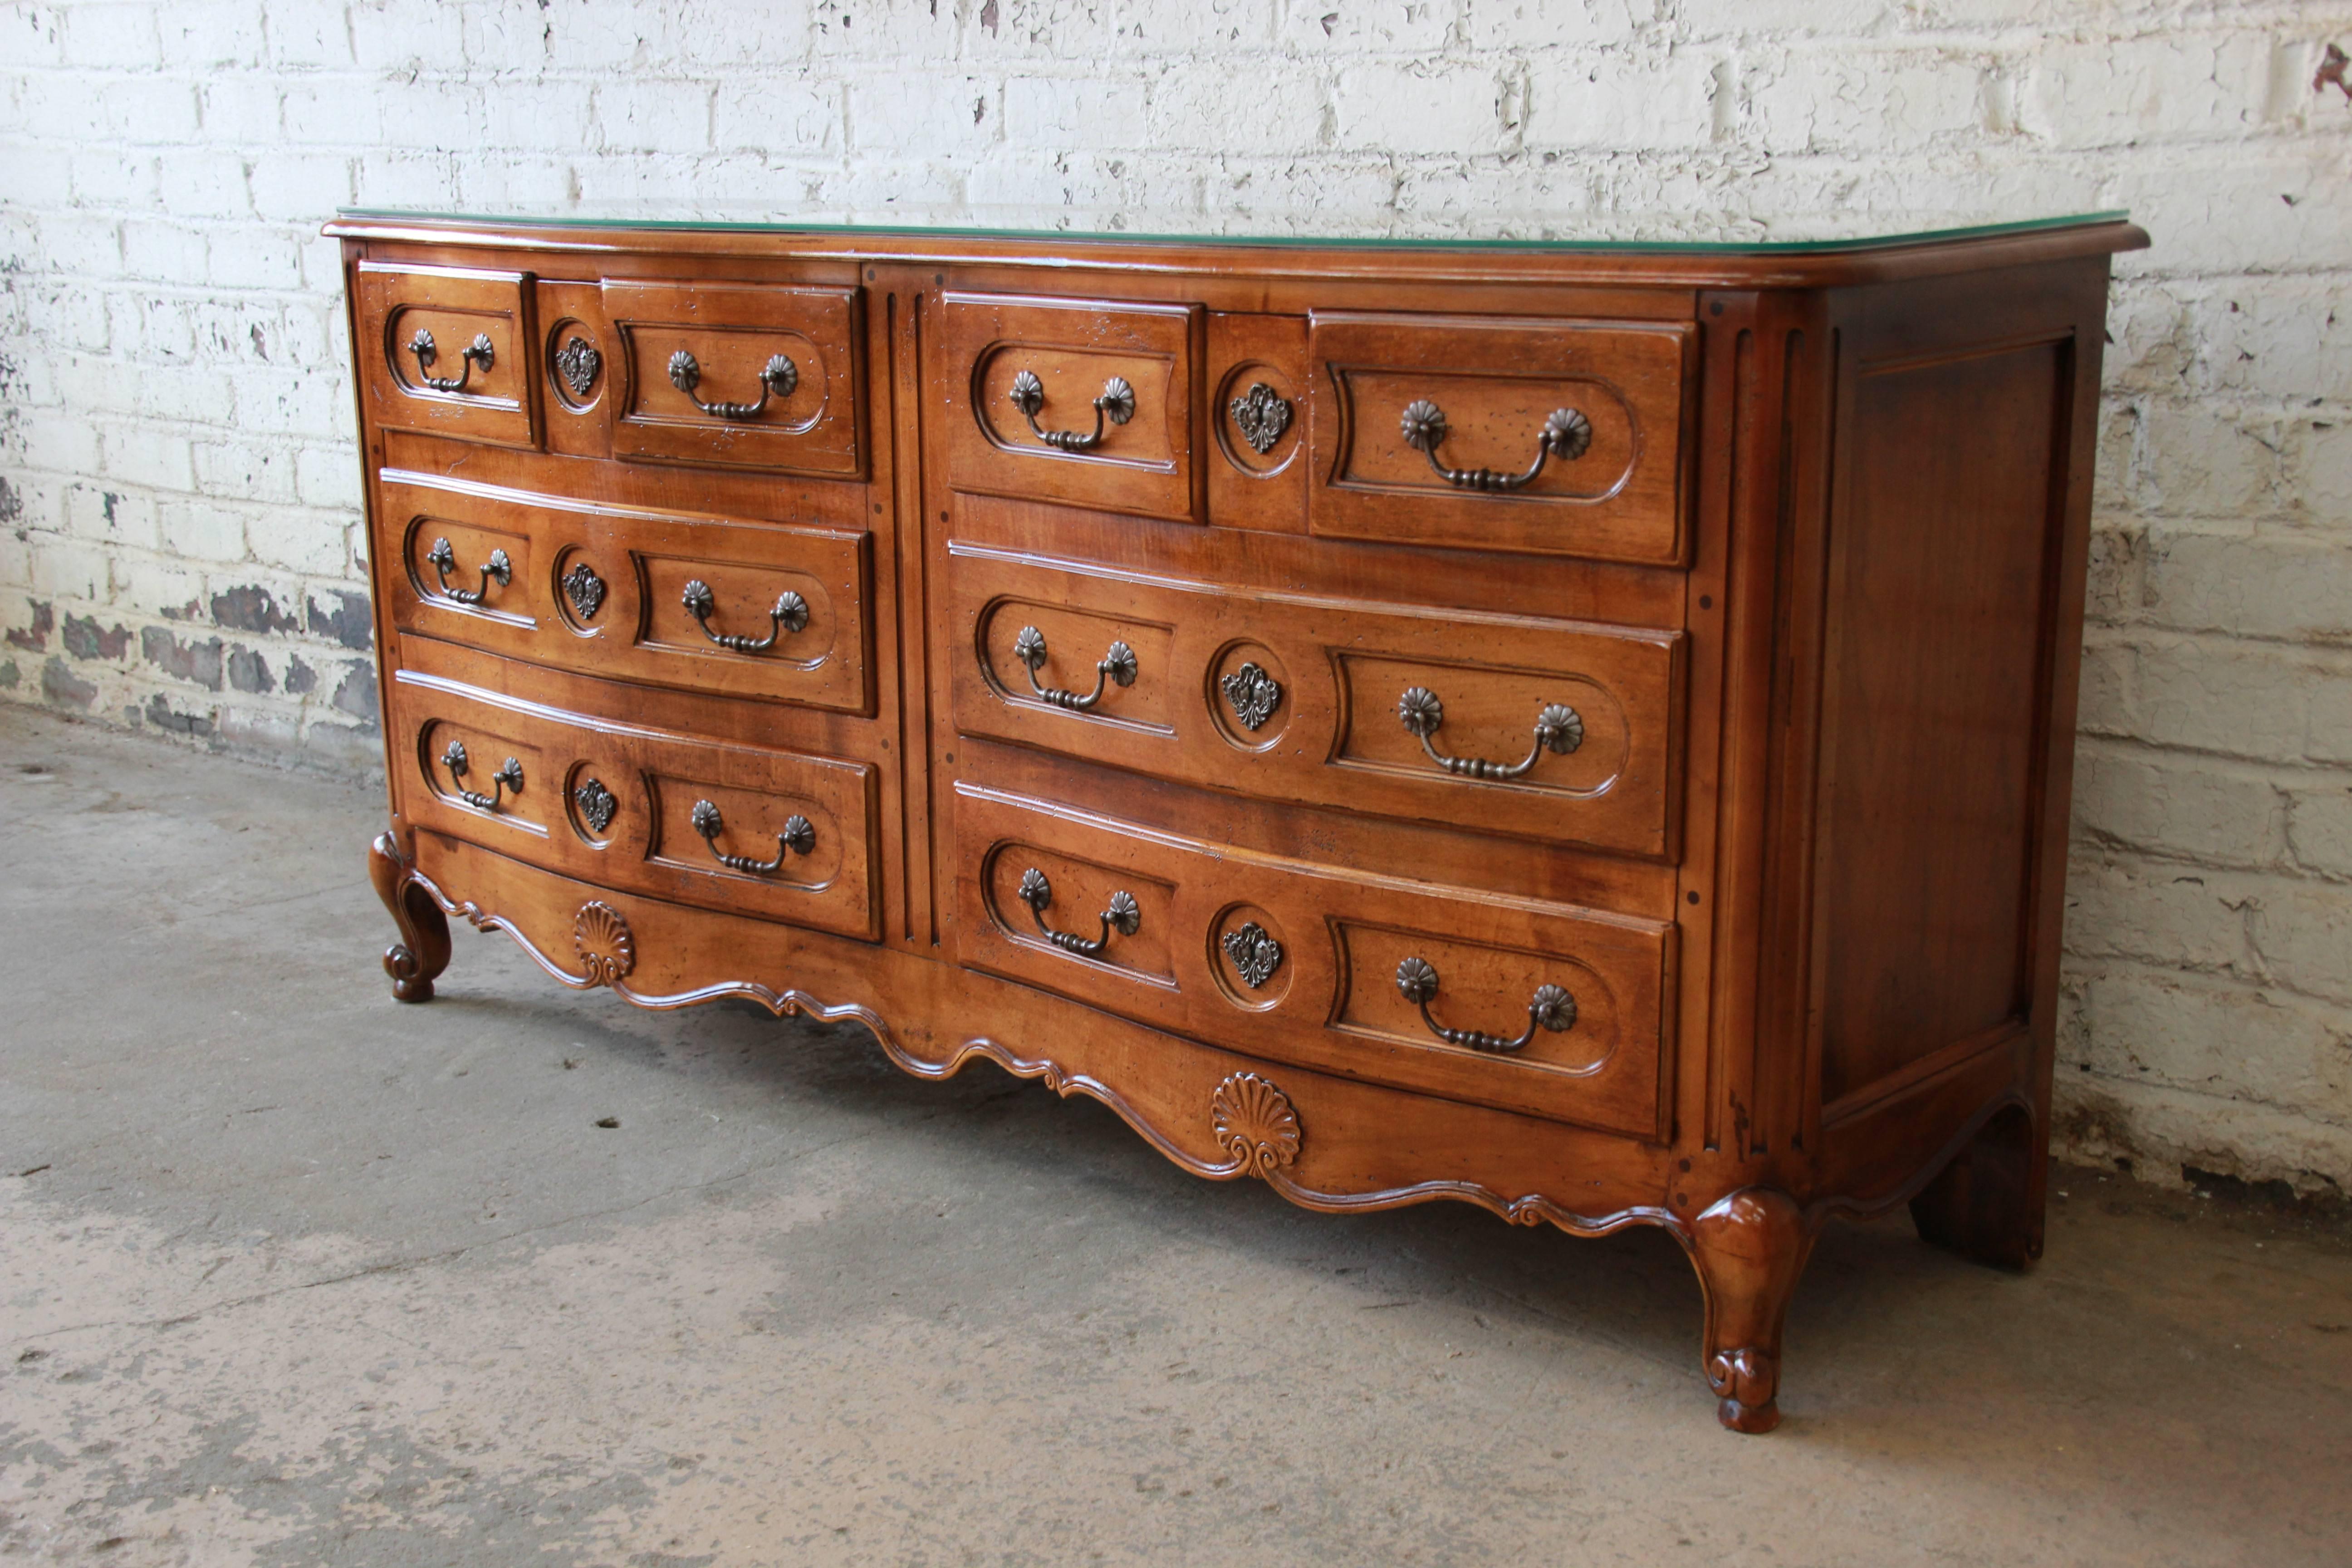 An outstanding solid cherrywood double dresser from the Pierre Deux French Country collection by Henredon. The dresser features stunning carved wood details with a shell motif, original hardware, and a Louis XV style. It offers ample room for